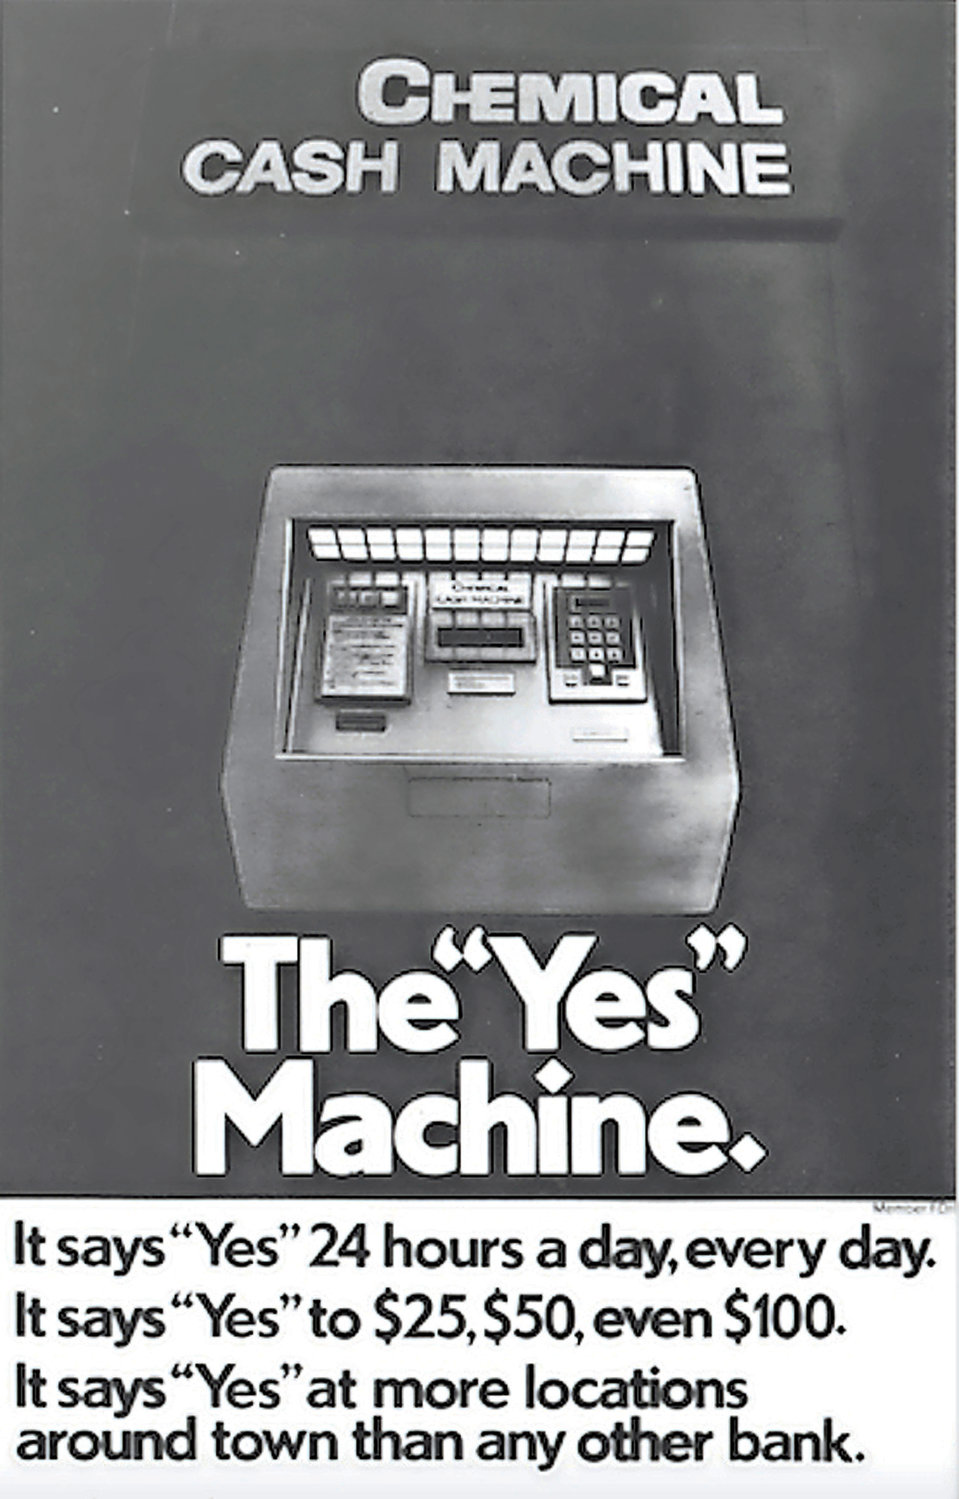 Chemical Bank introduced the ATM in 1969 in Rockville Centre before Chase acquired the company in 1996.